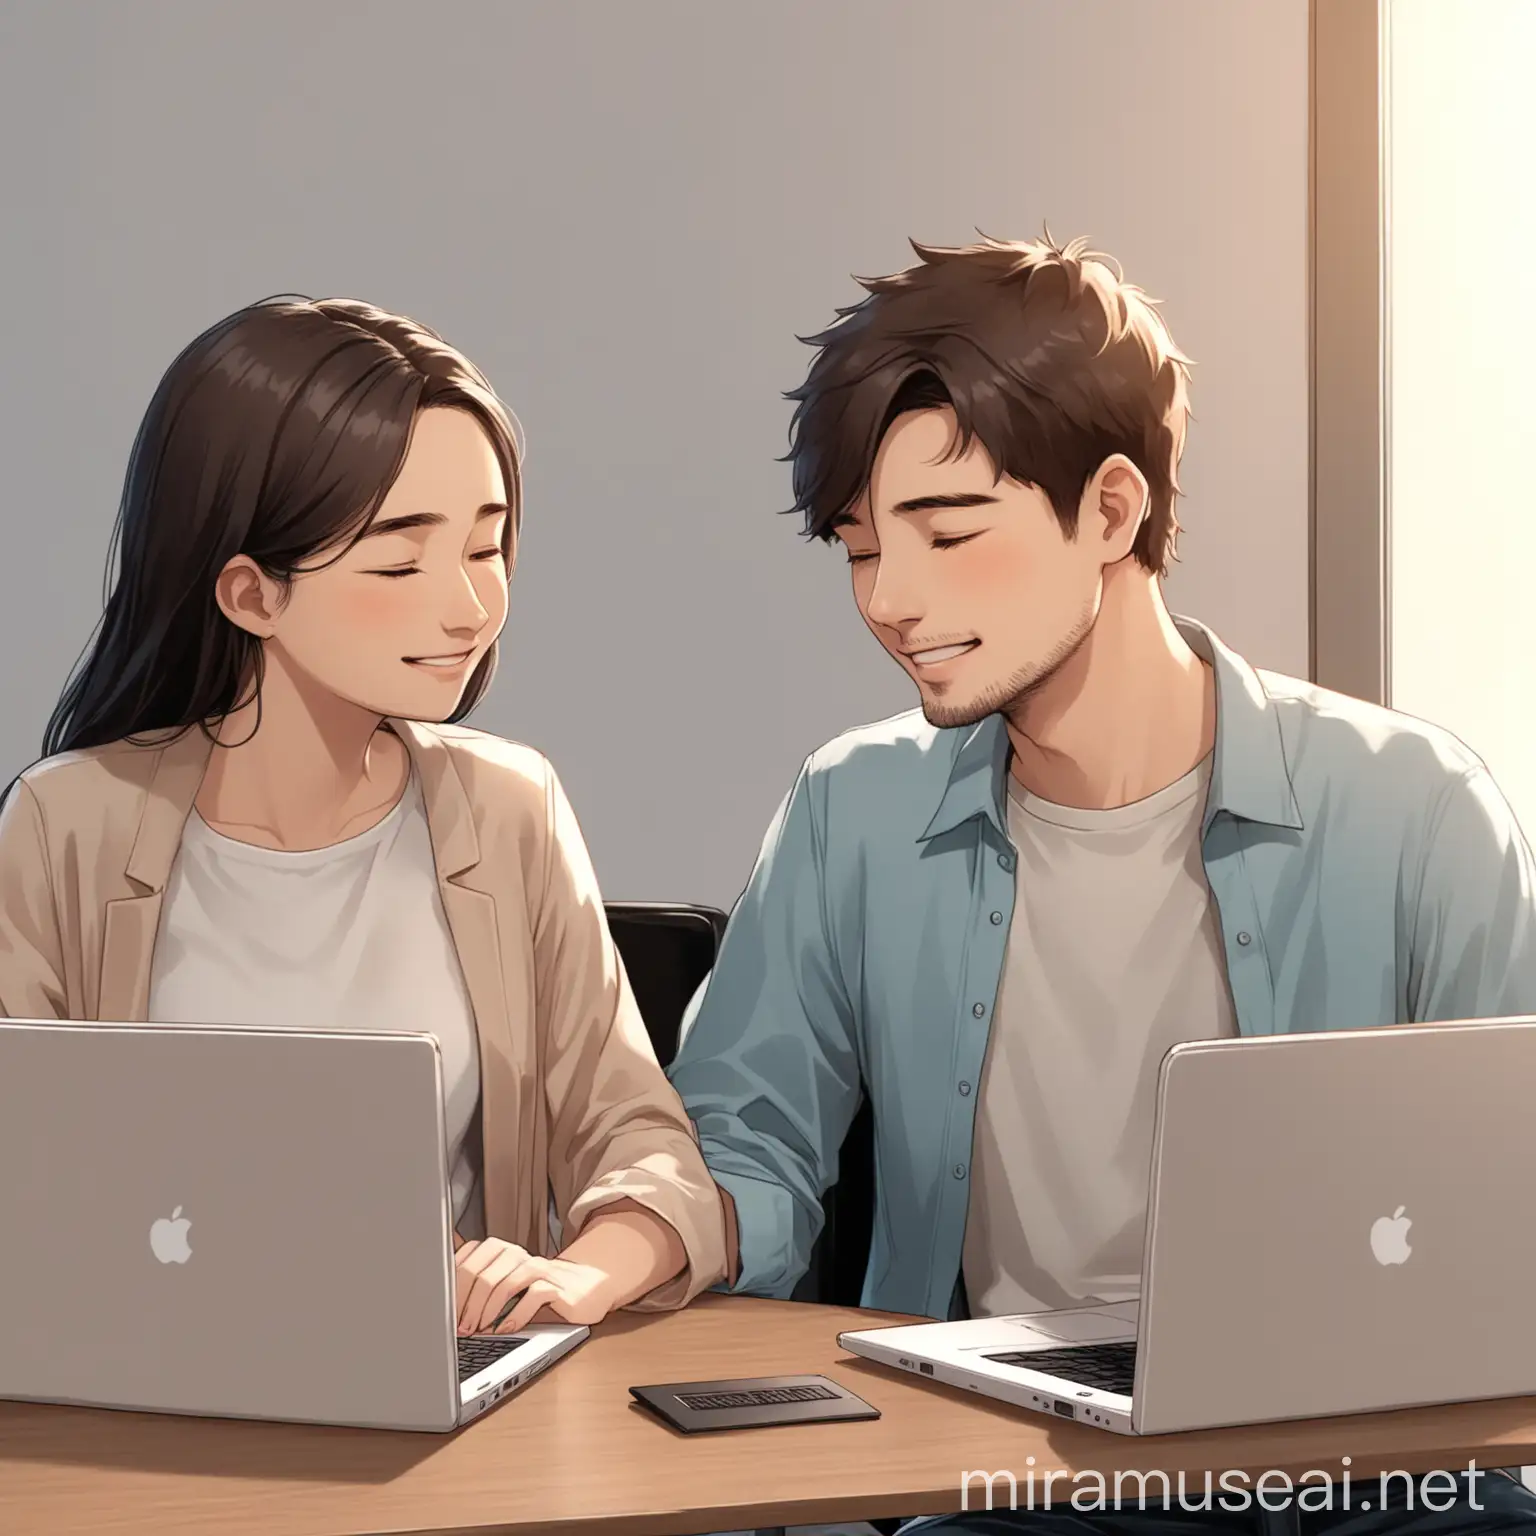 Couple Working Together on Laptops Sharing a Sweet Moment